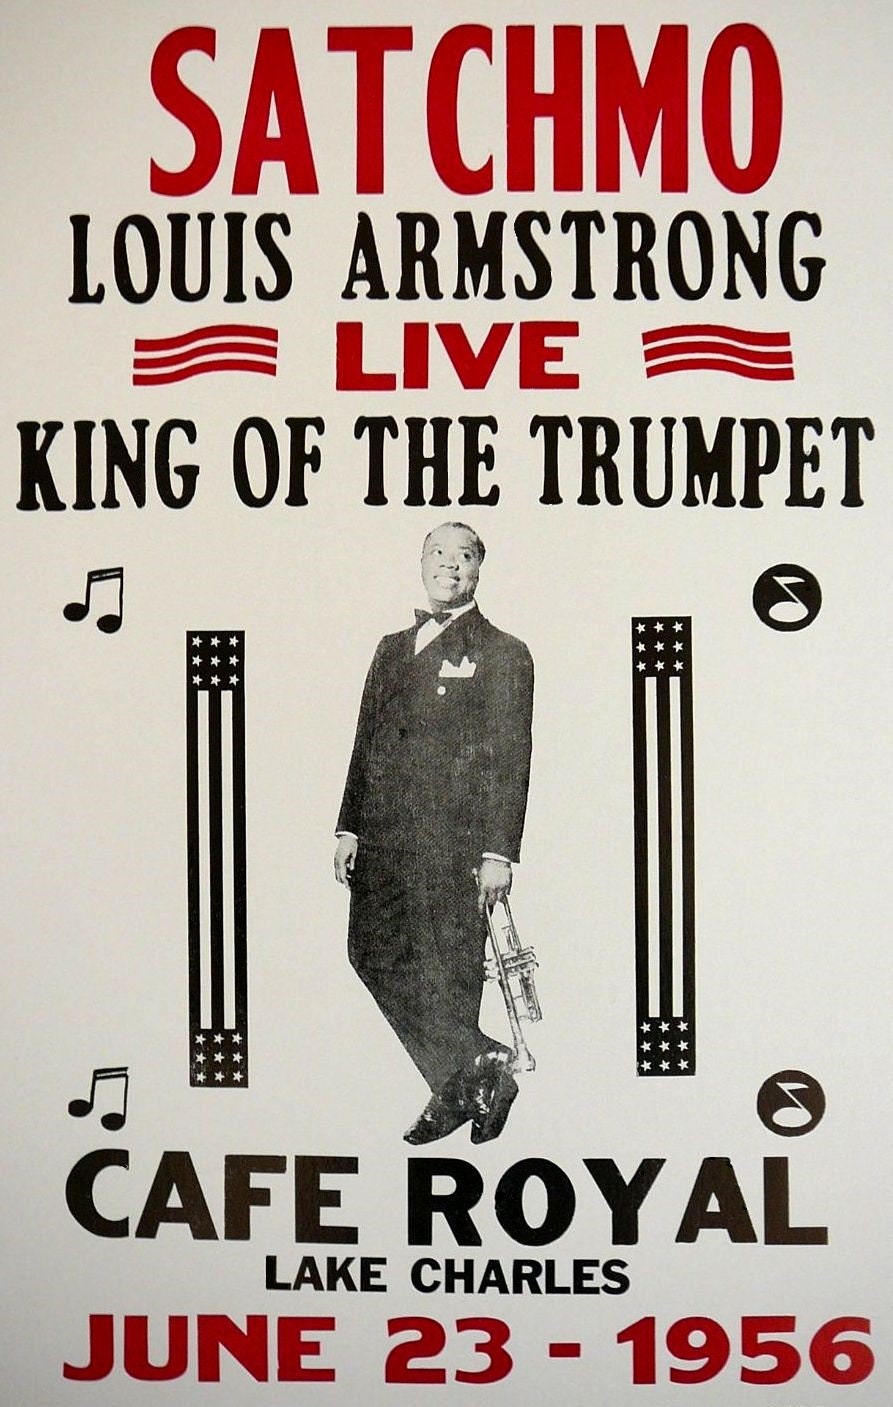 Louis Armstrong King of the trumpet Concert poster re print (398)